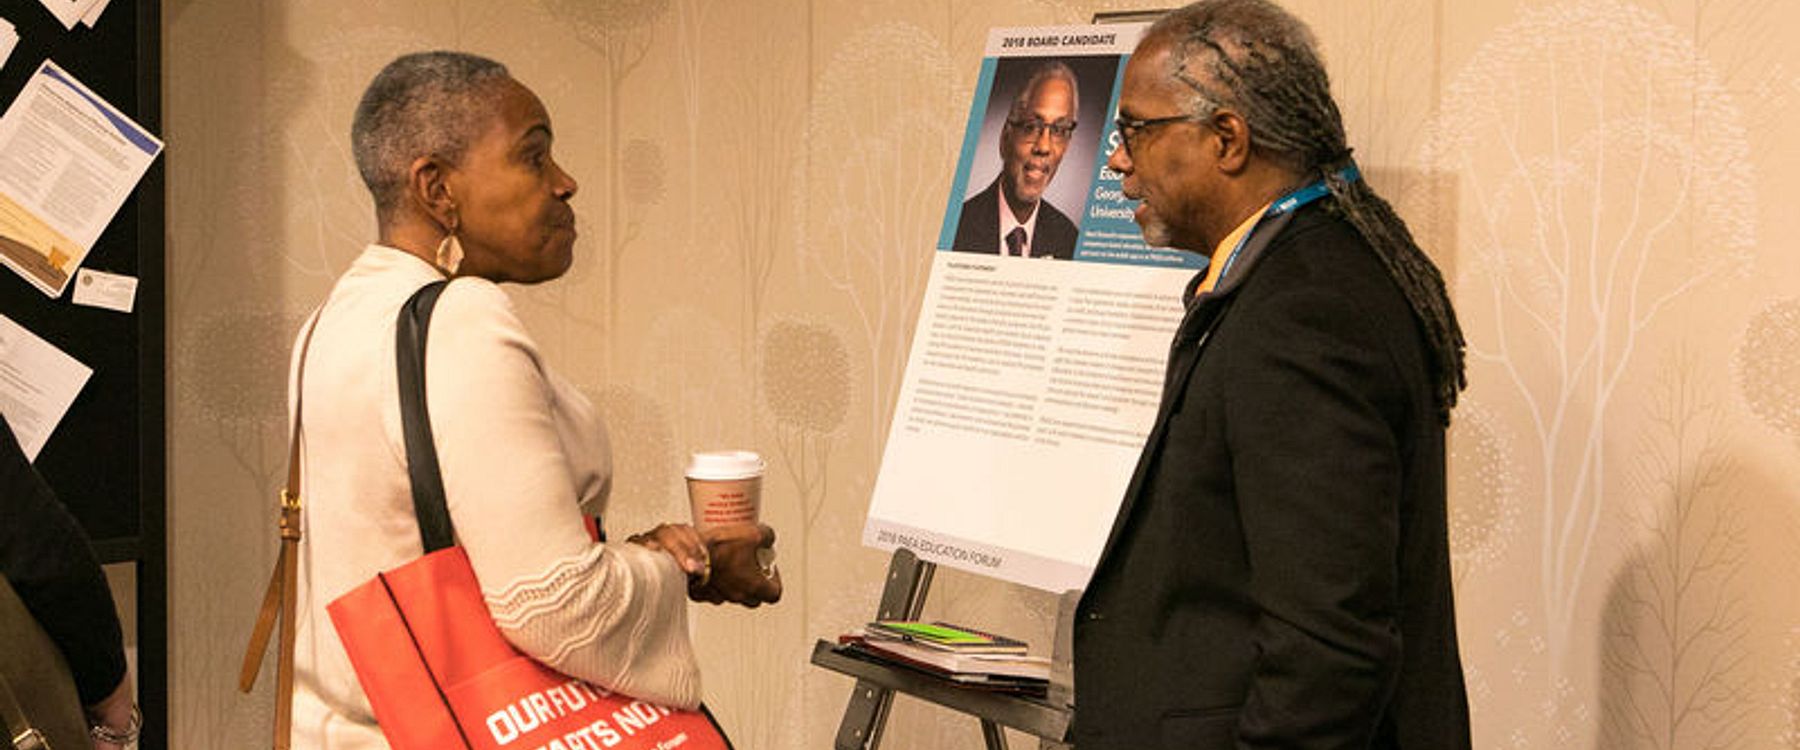 Howard Straker talks with a member during the Board of Directors candidates' meet and greet at the 2018 Education Forum.